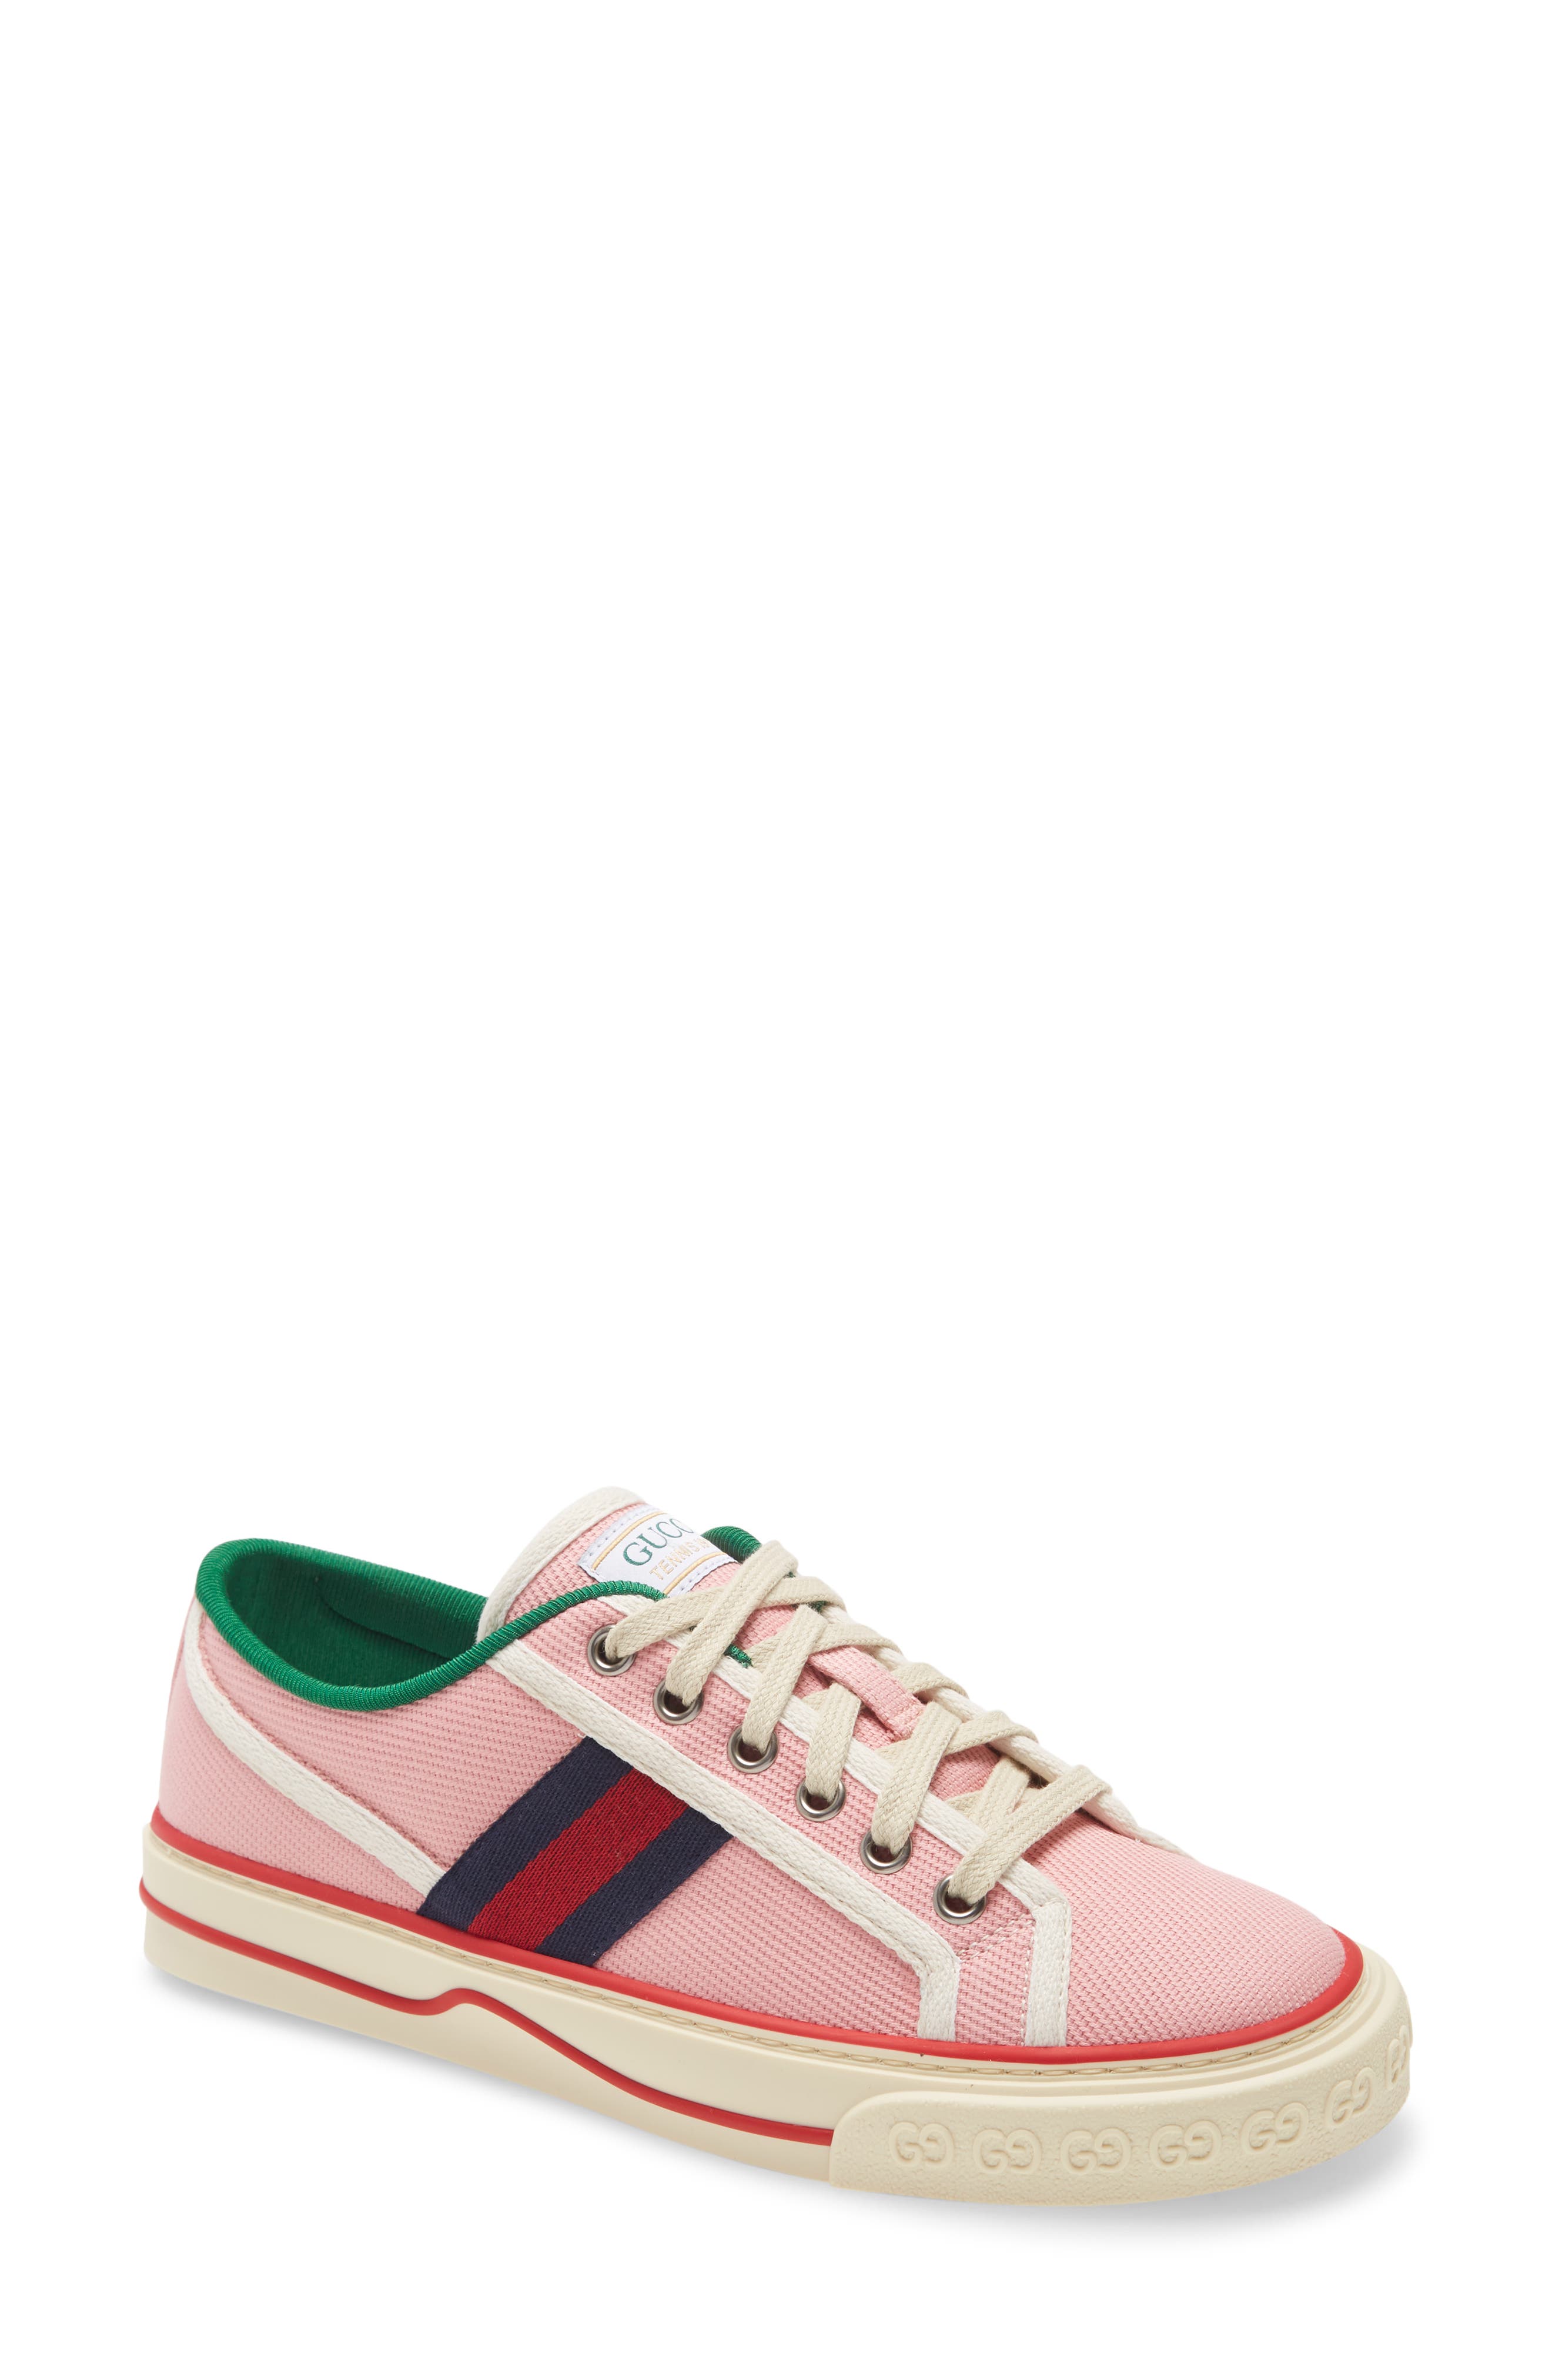 gucci bling tennis shoes